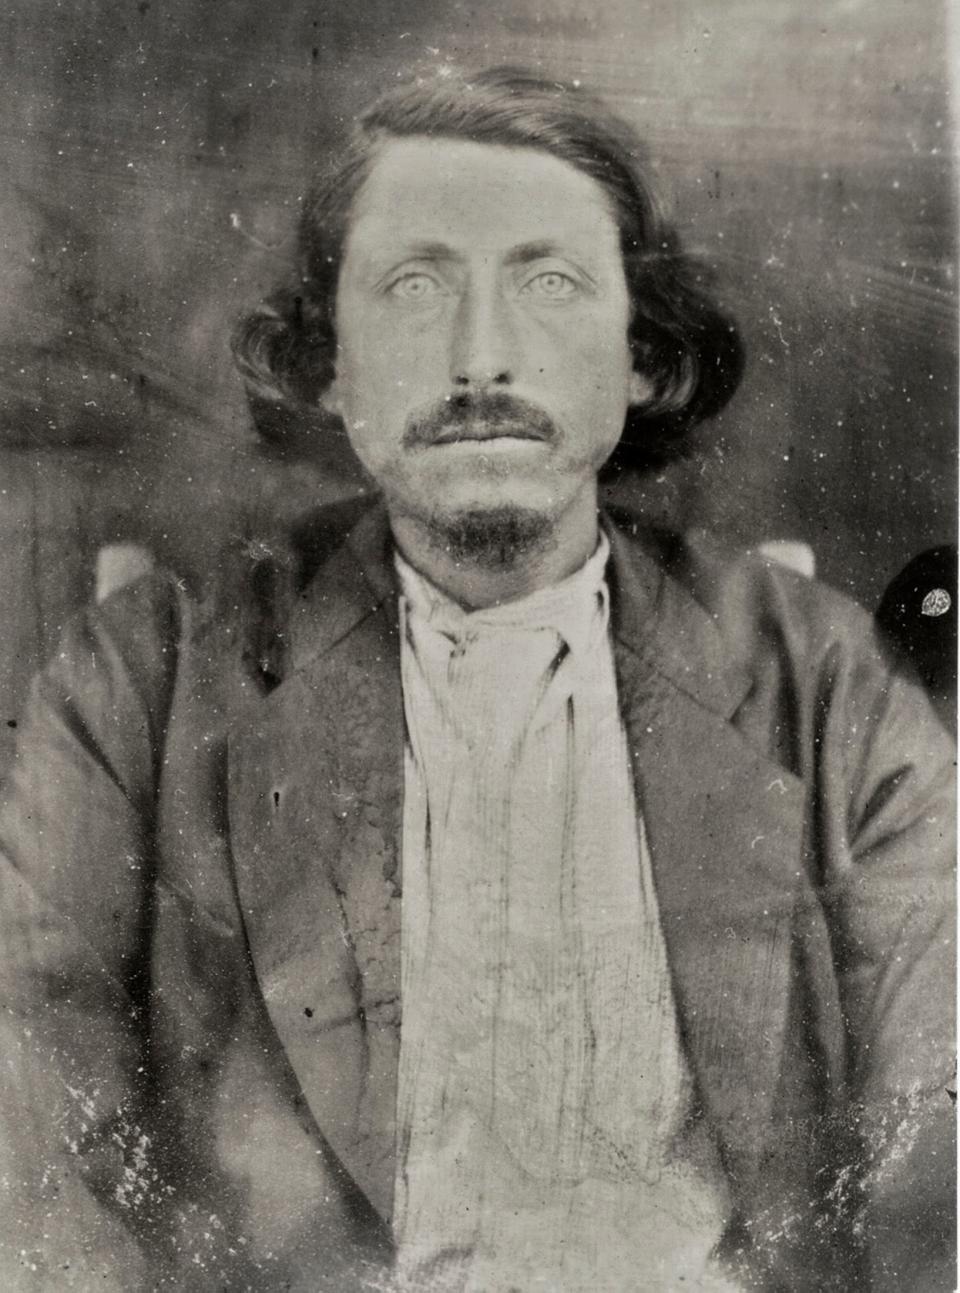 Montford T. Johnson, "The Chickasaw Rancher," is shown in this early to mid-1870s photograph.